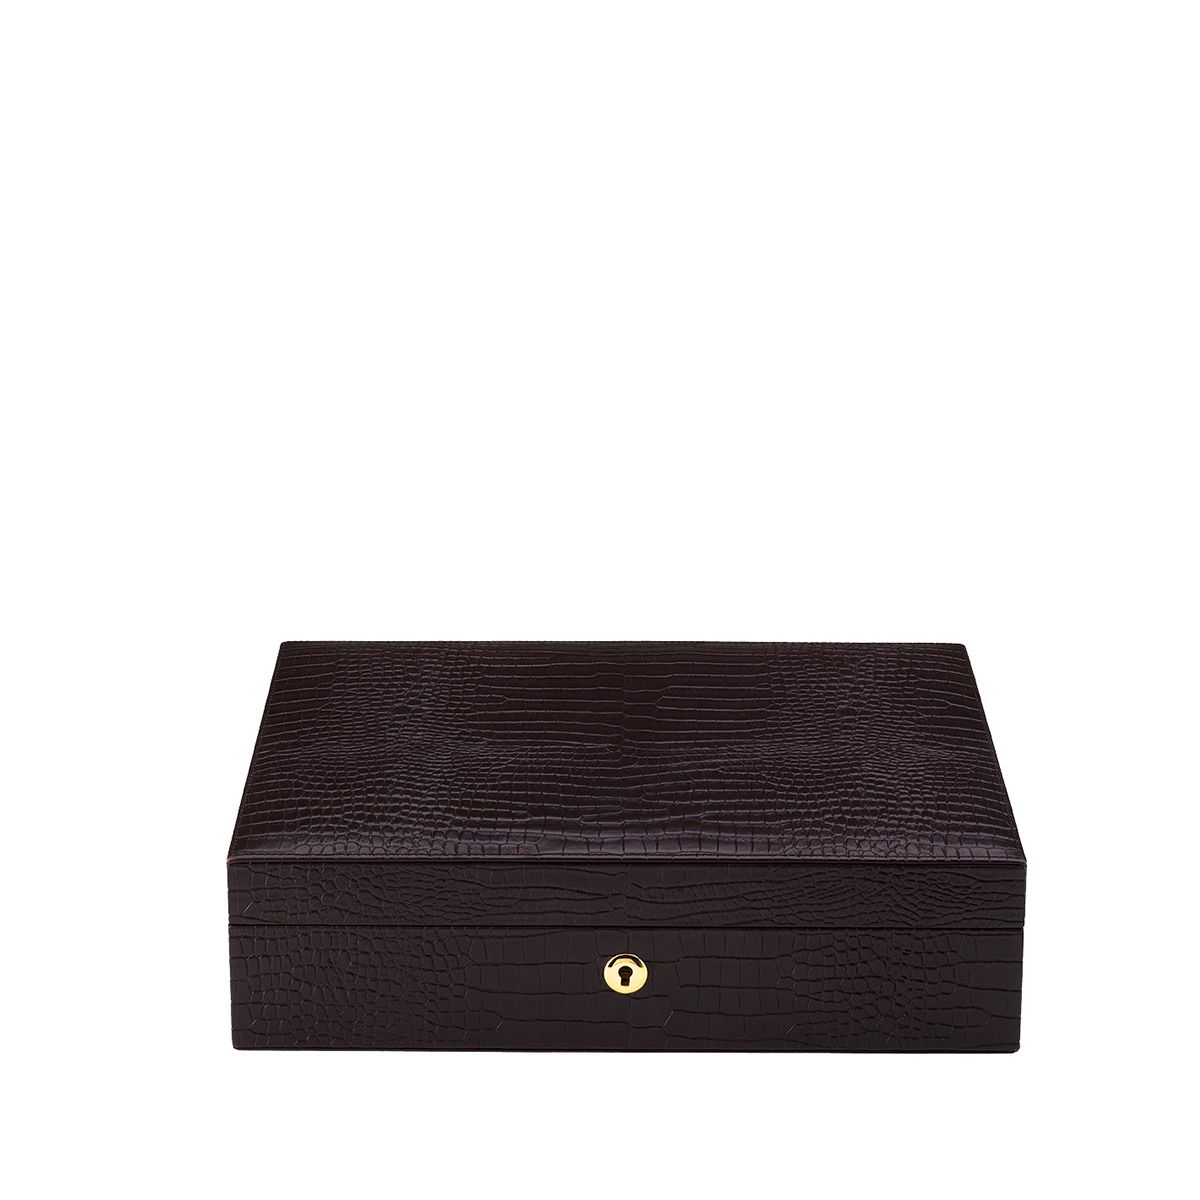 Rapport Brompton Ten Watch Box in Brown Leather | Gregory Jewellers